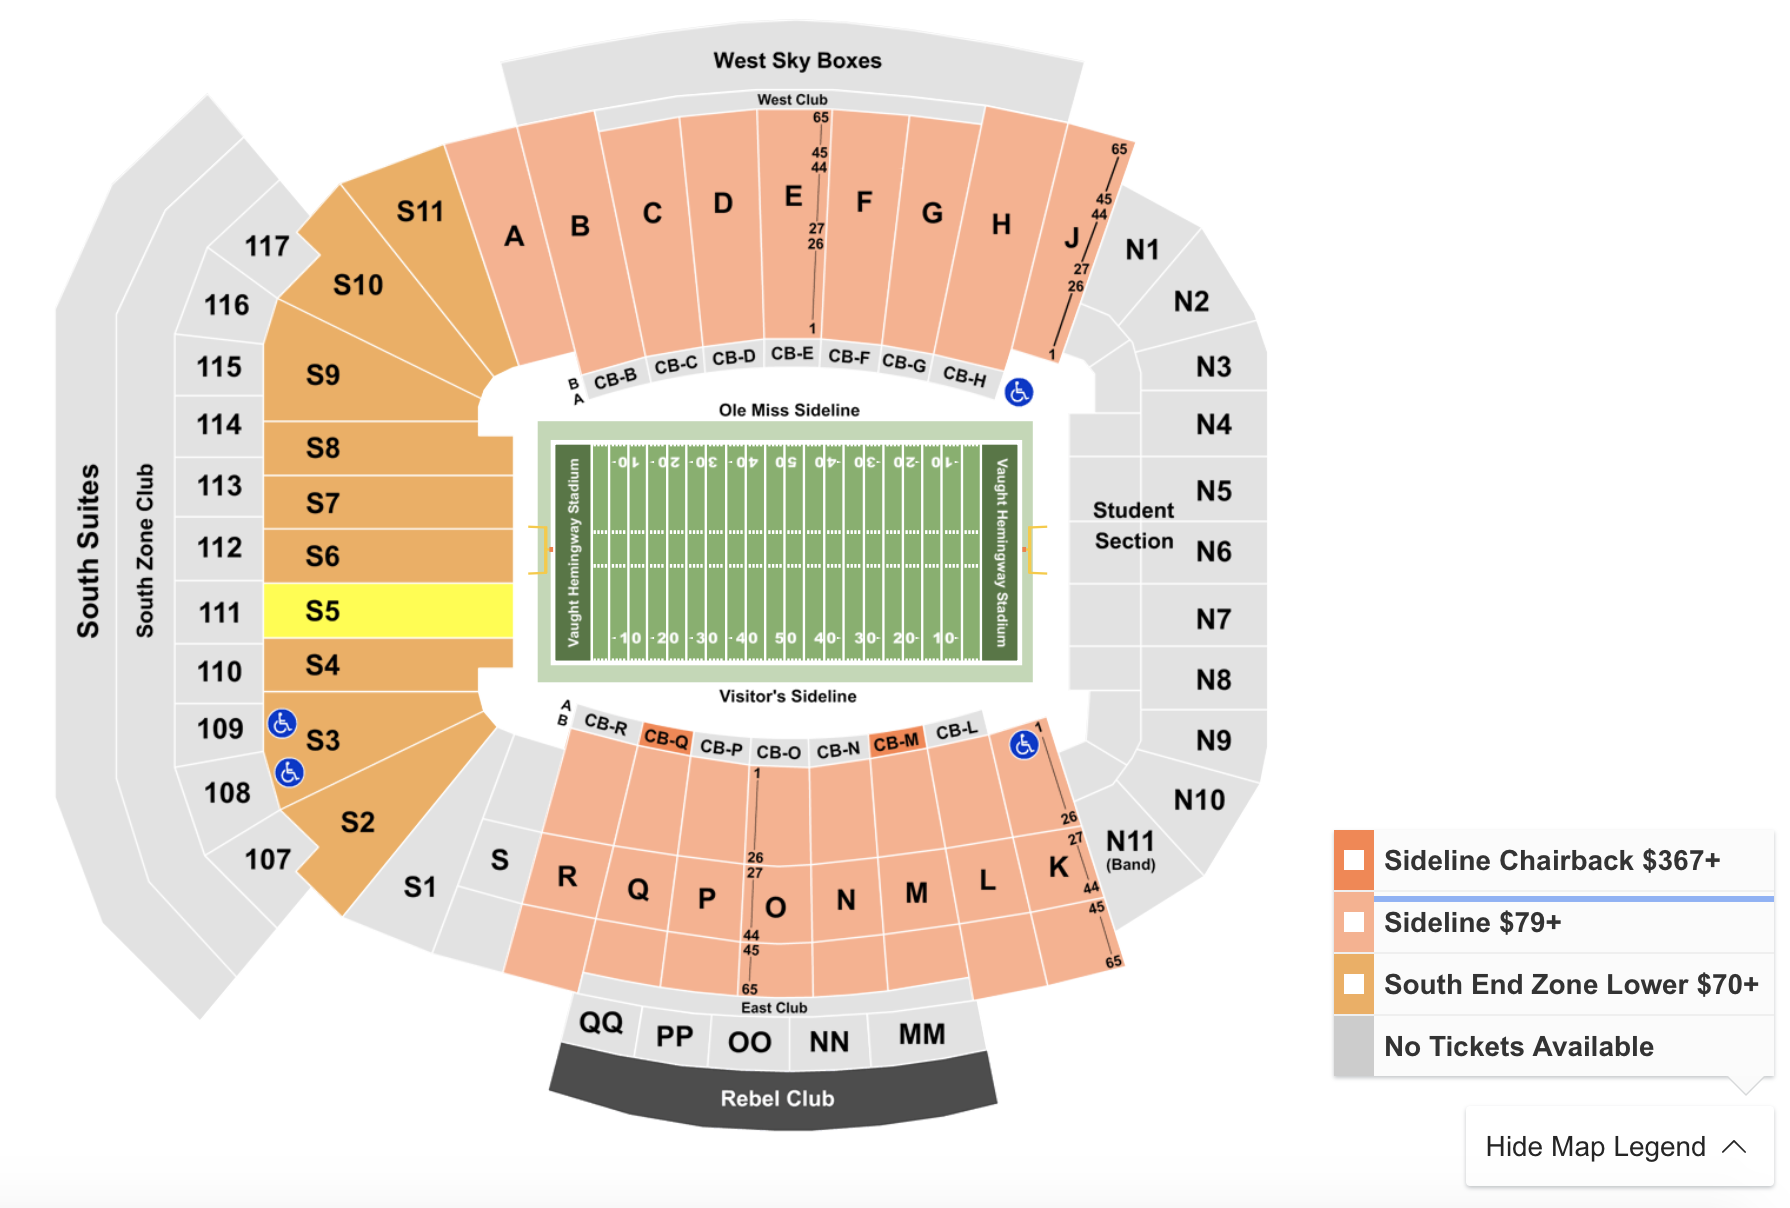 How To Find The Cheapest Ole Miss vs LSU Football Tickets